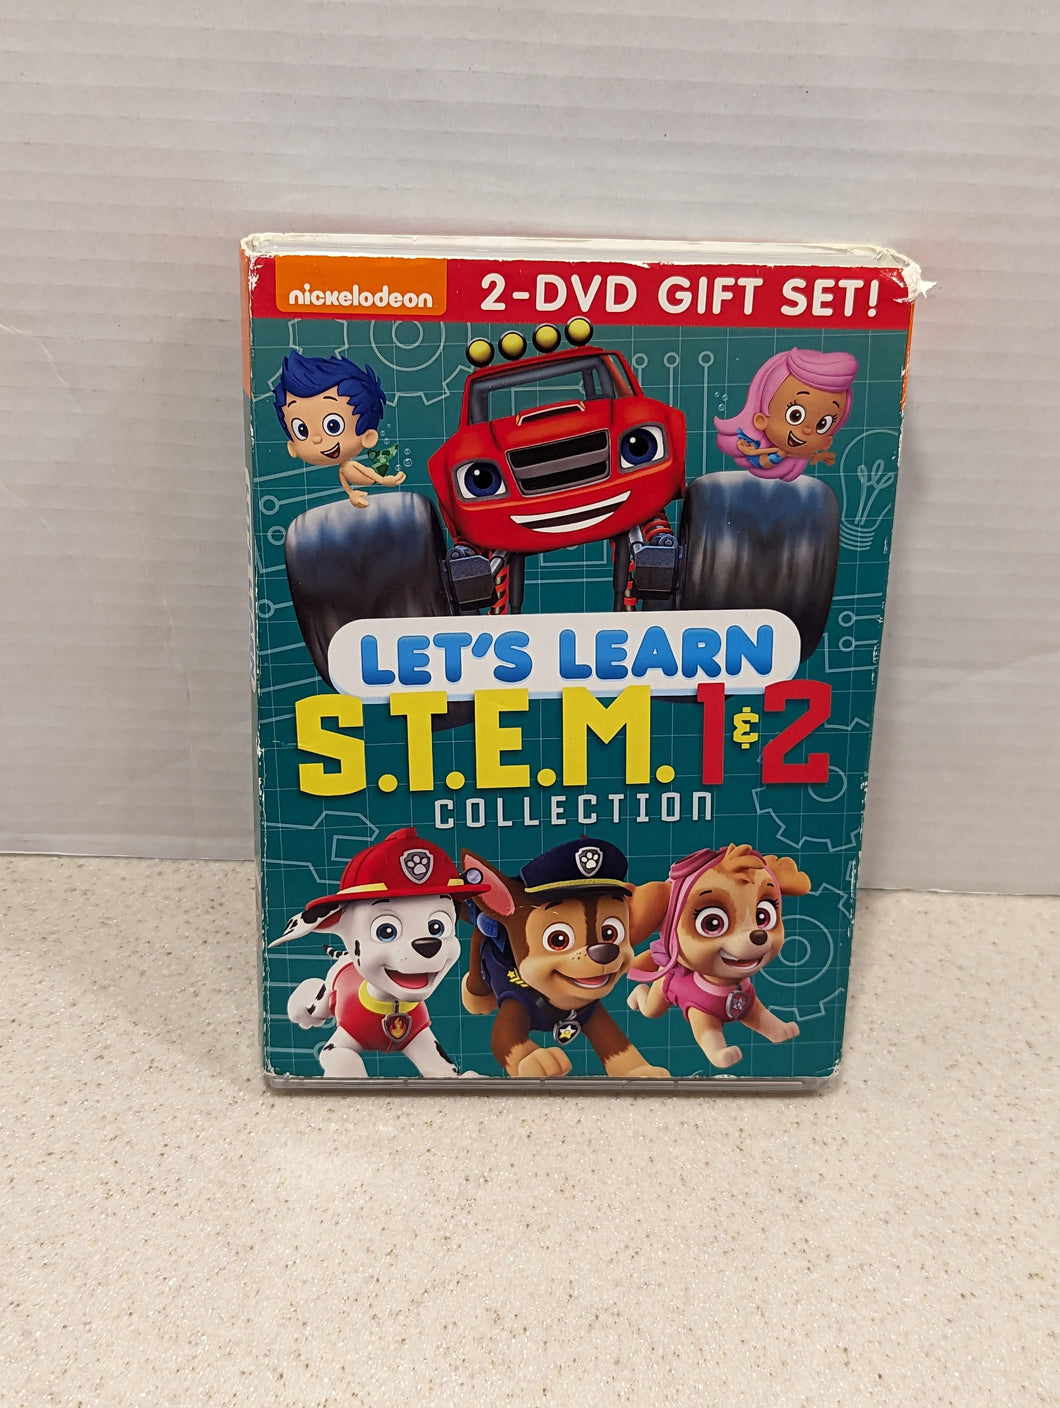 Nick Jr Let's Learn Stem 1 and 2 Collection, 2 DVD Set. Good used condition.